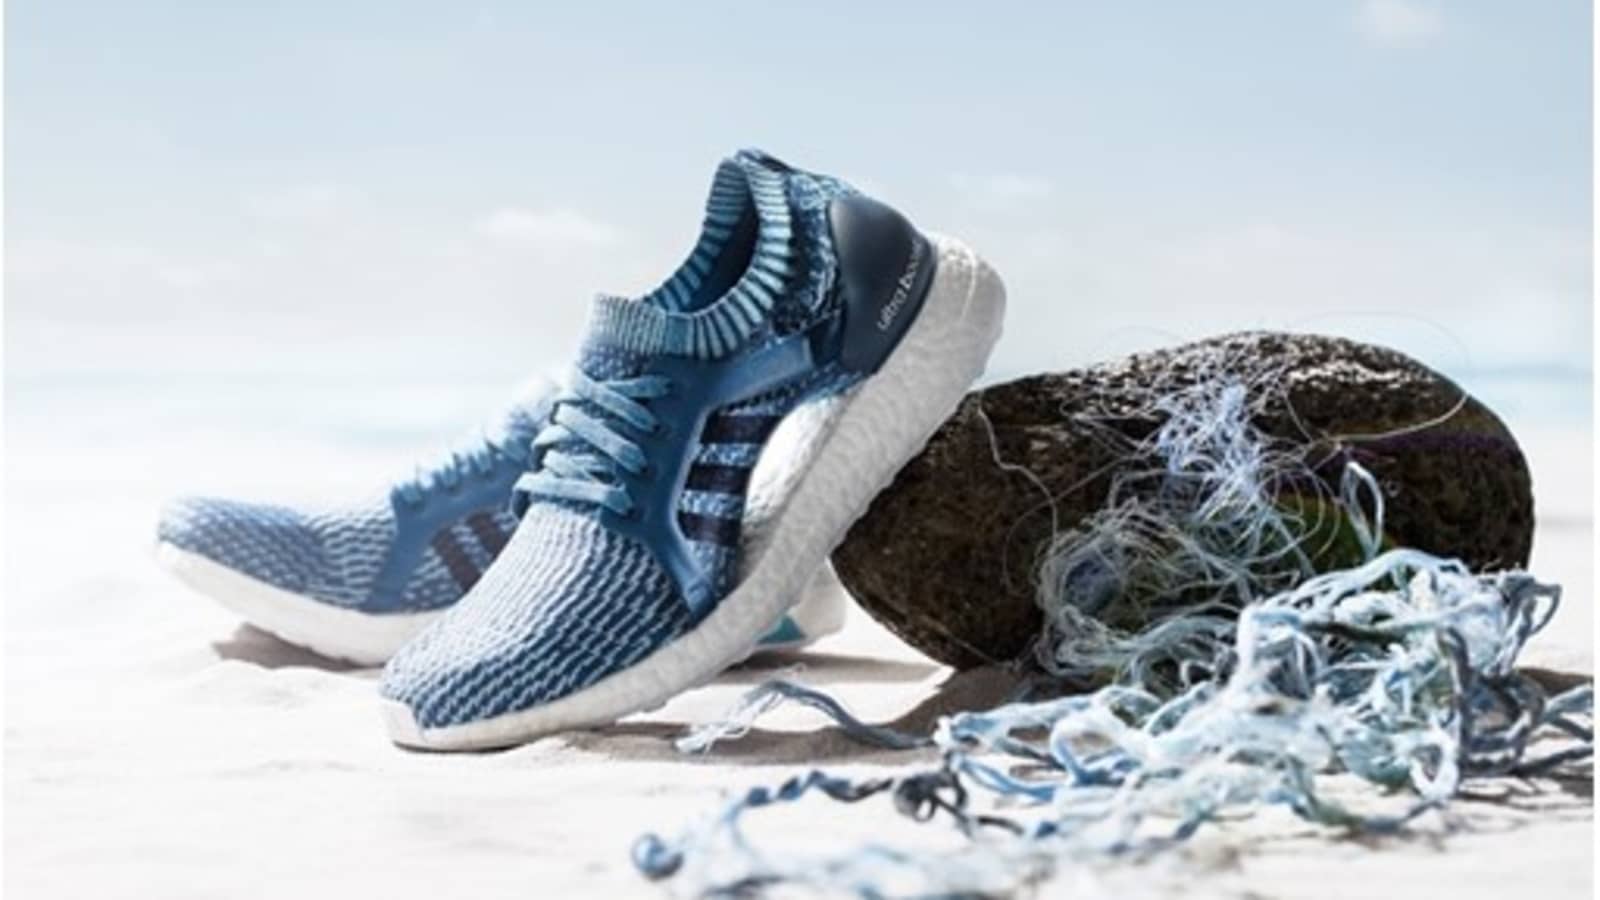 Adidas sold million shoes made out of ocean plastic in 2017